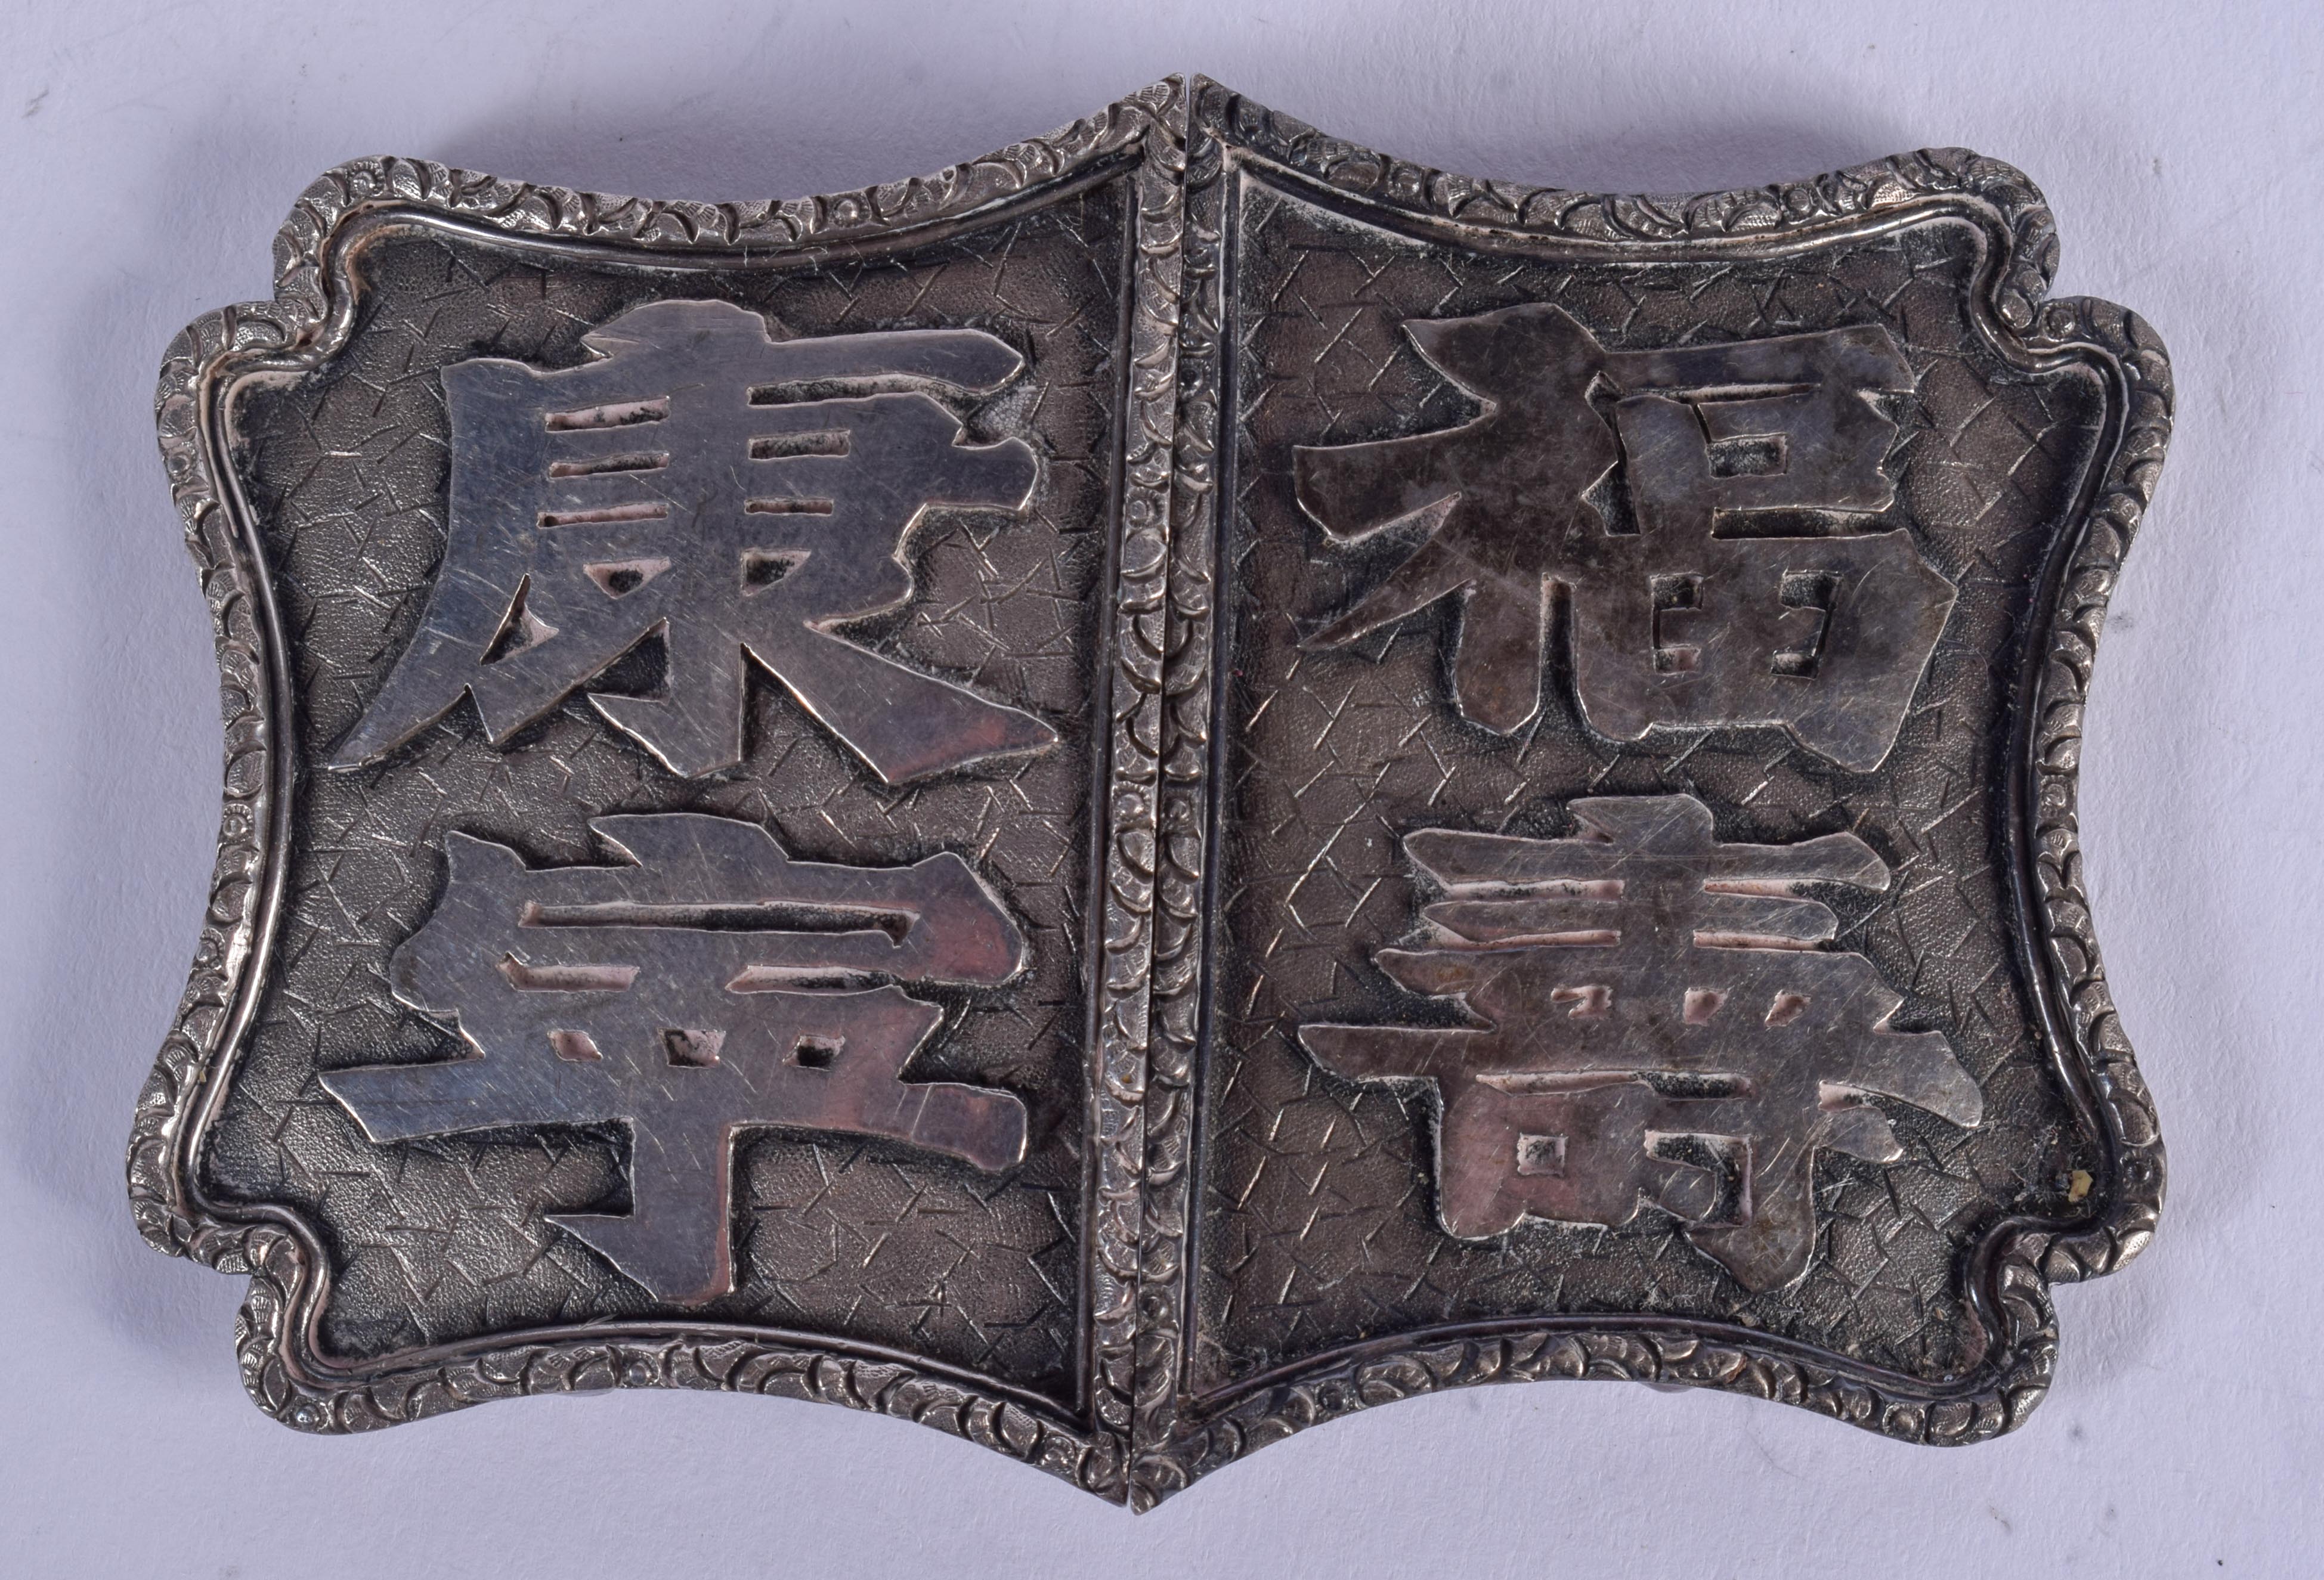 A 19TH CENTURY CHINESE EXPORT SILVER BUCKLE. 39 grams. 10 cm x 6 cm.